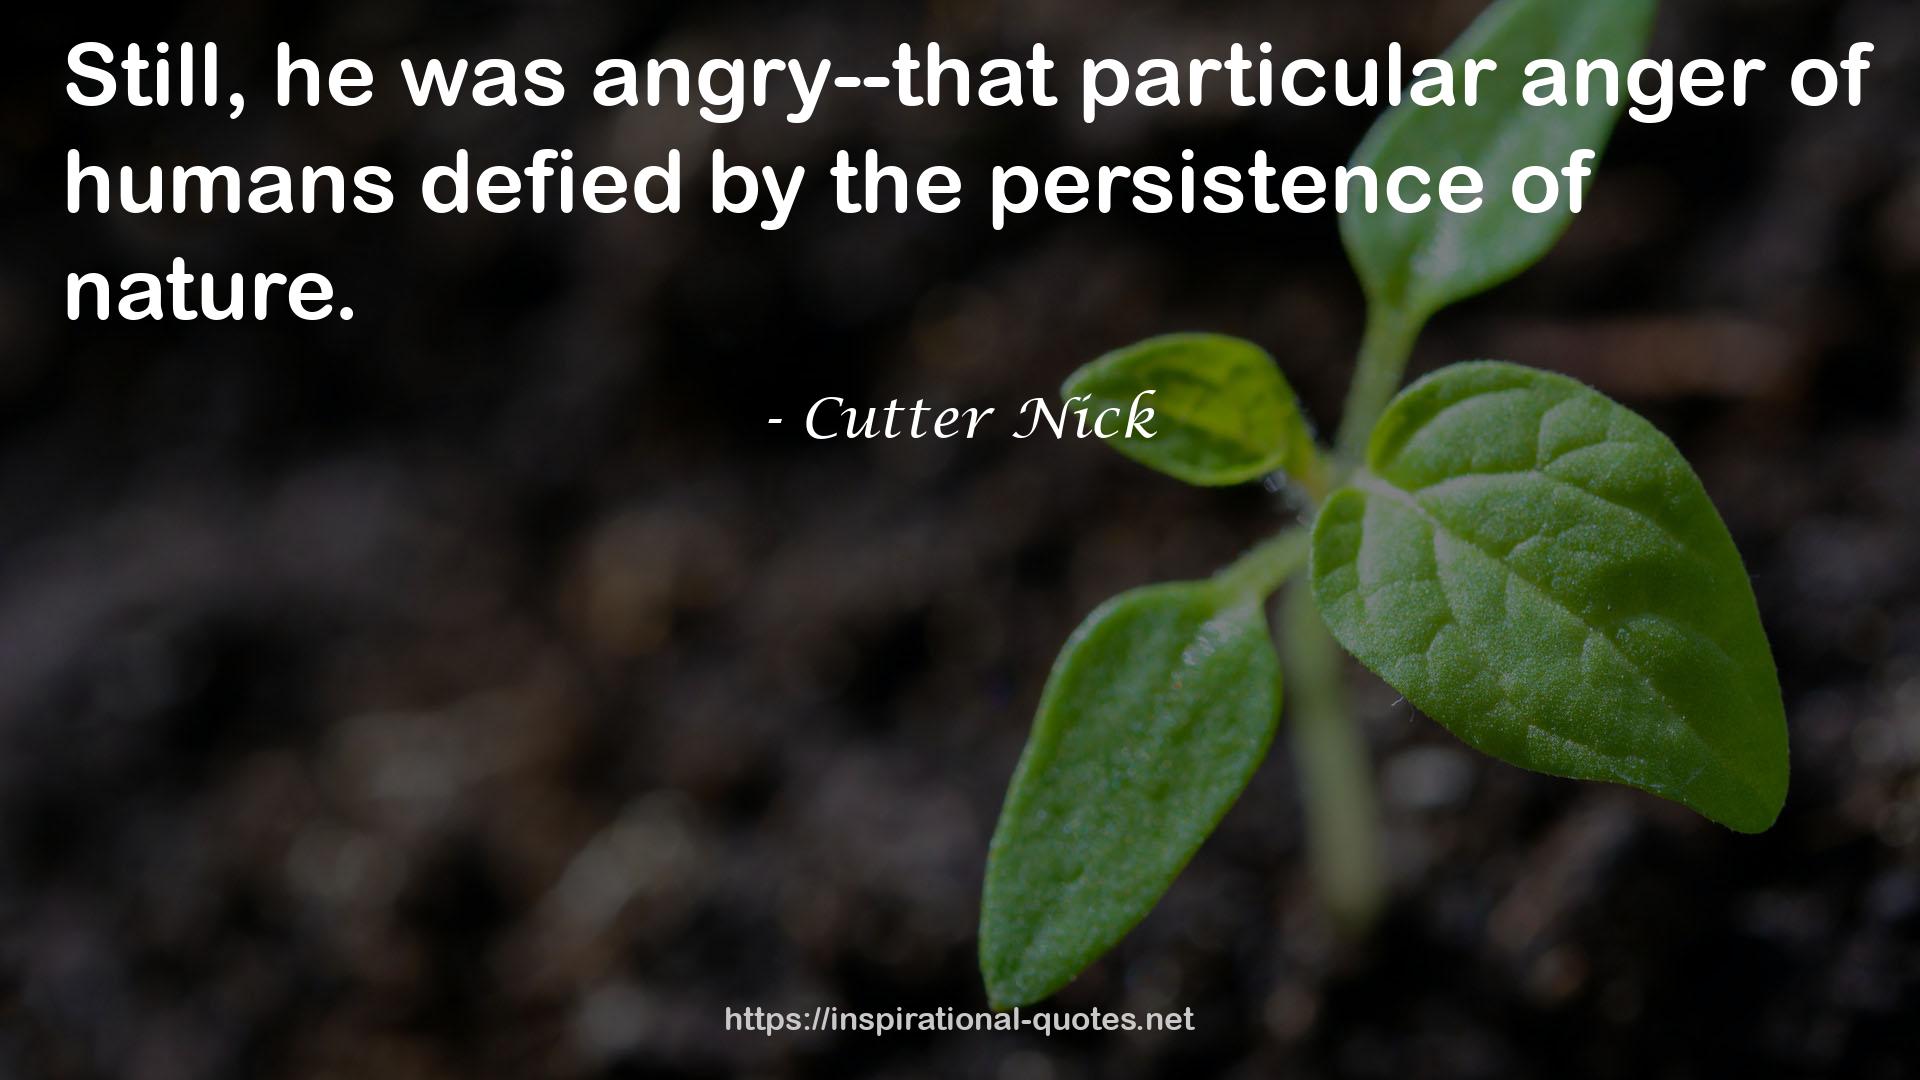 Cutter Nick QUOTES